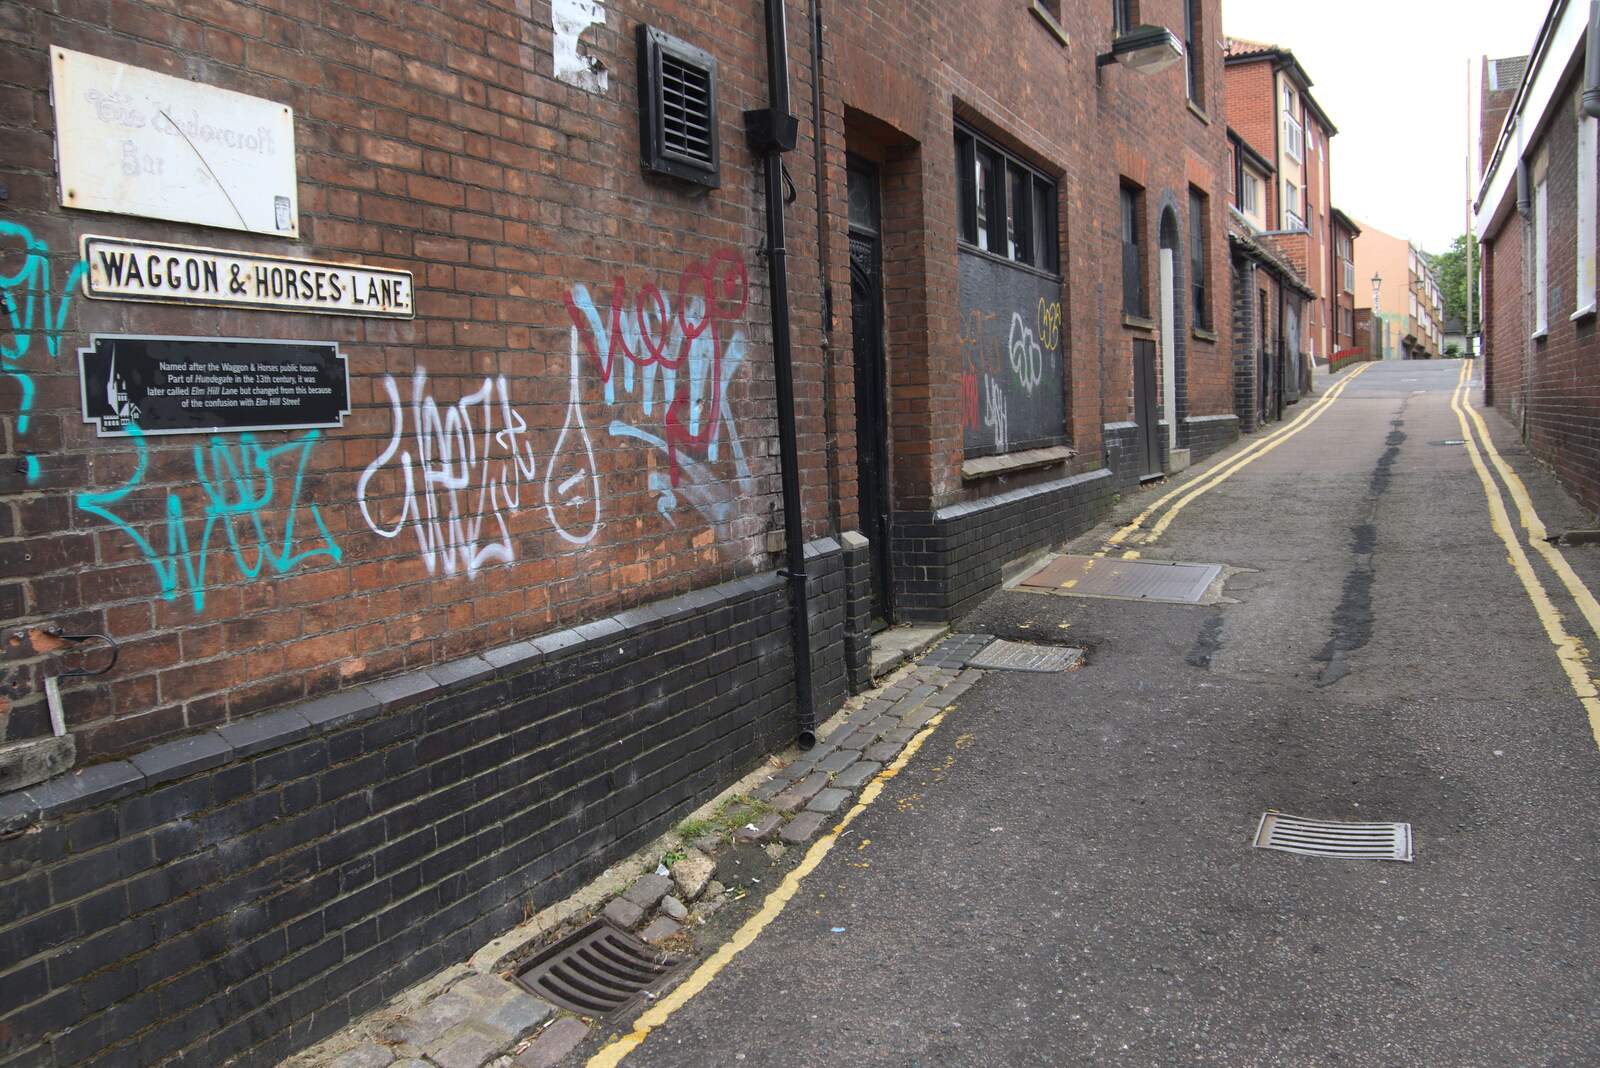 Graffiti on Waggon and Horses Lane from Dippy and the City Dinosaur Trail, Norwich, Norfolk - 19th August 2021